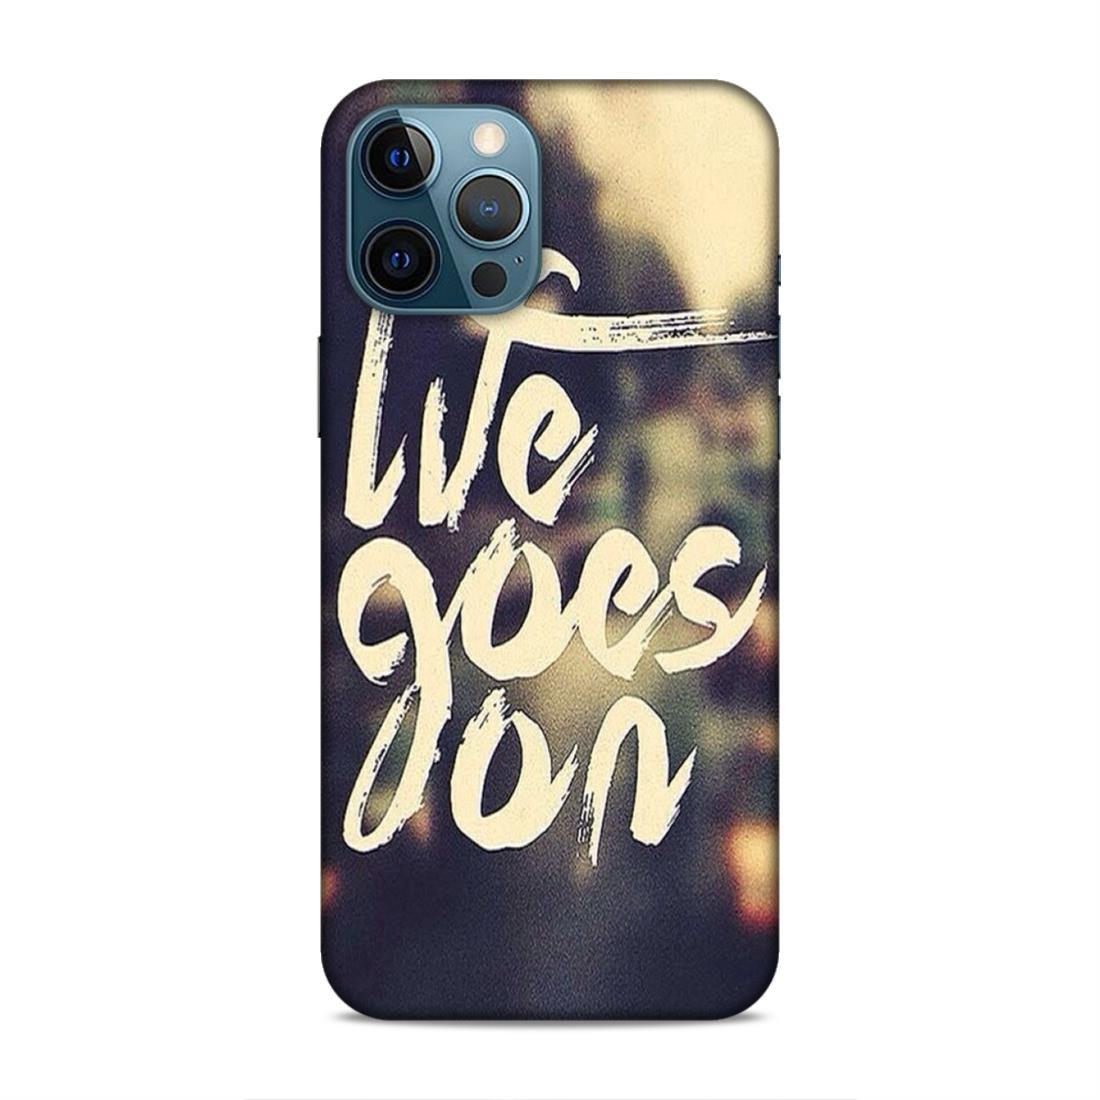 Life Goes On iPhone 12 Pro Max Mobile Cover Case